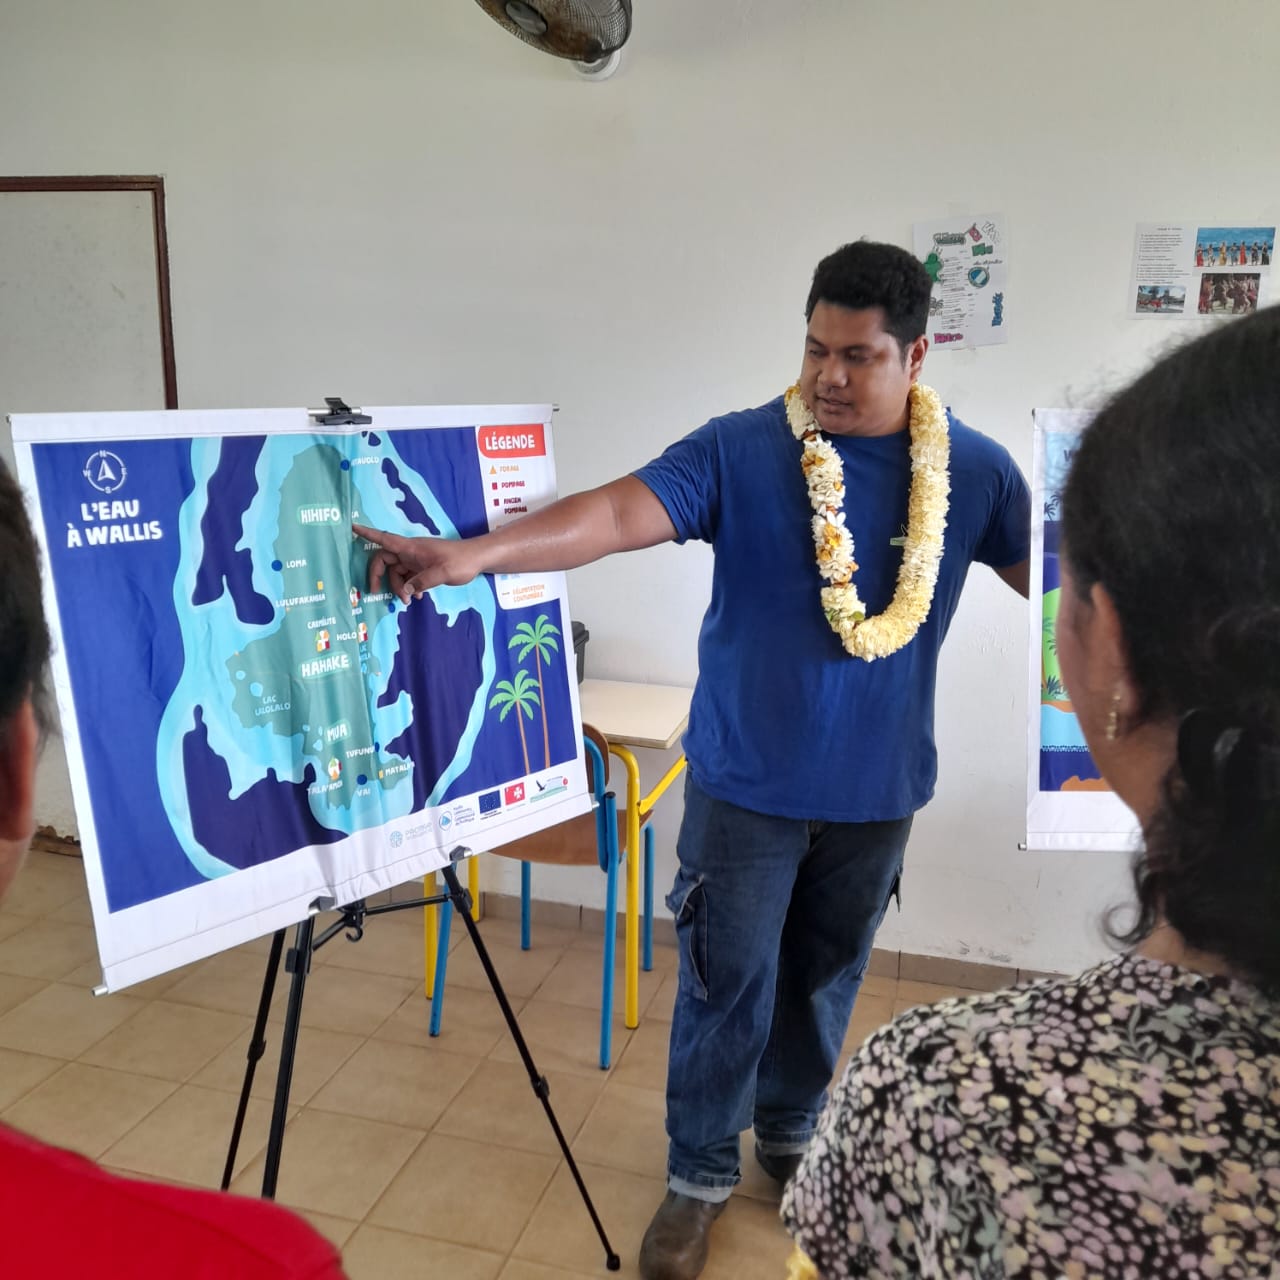 Workshop using the educational kit "Water" by the Territorial Service of the Environment of Wallis and Futuna